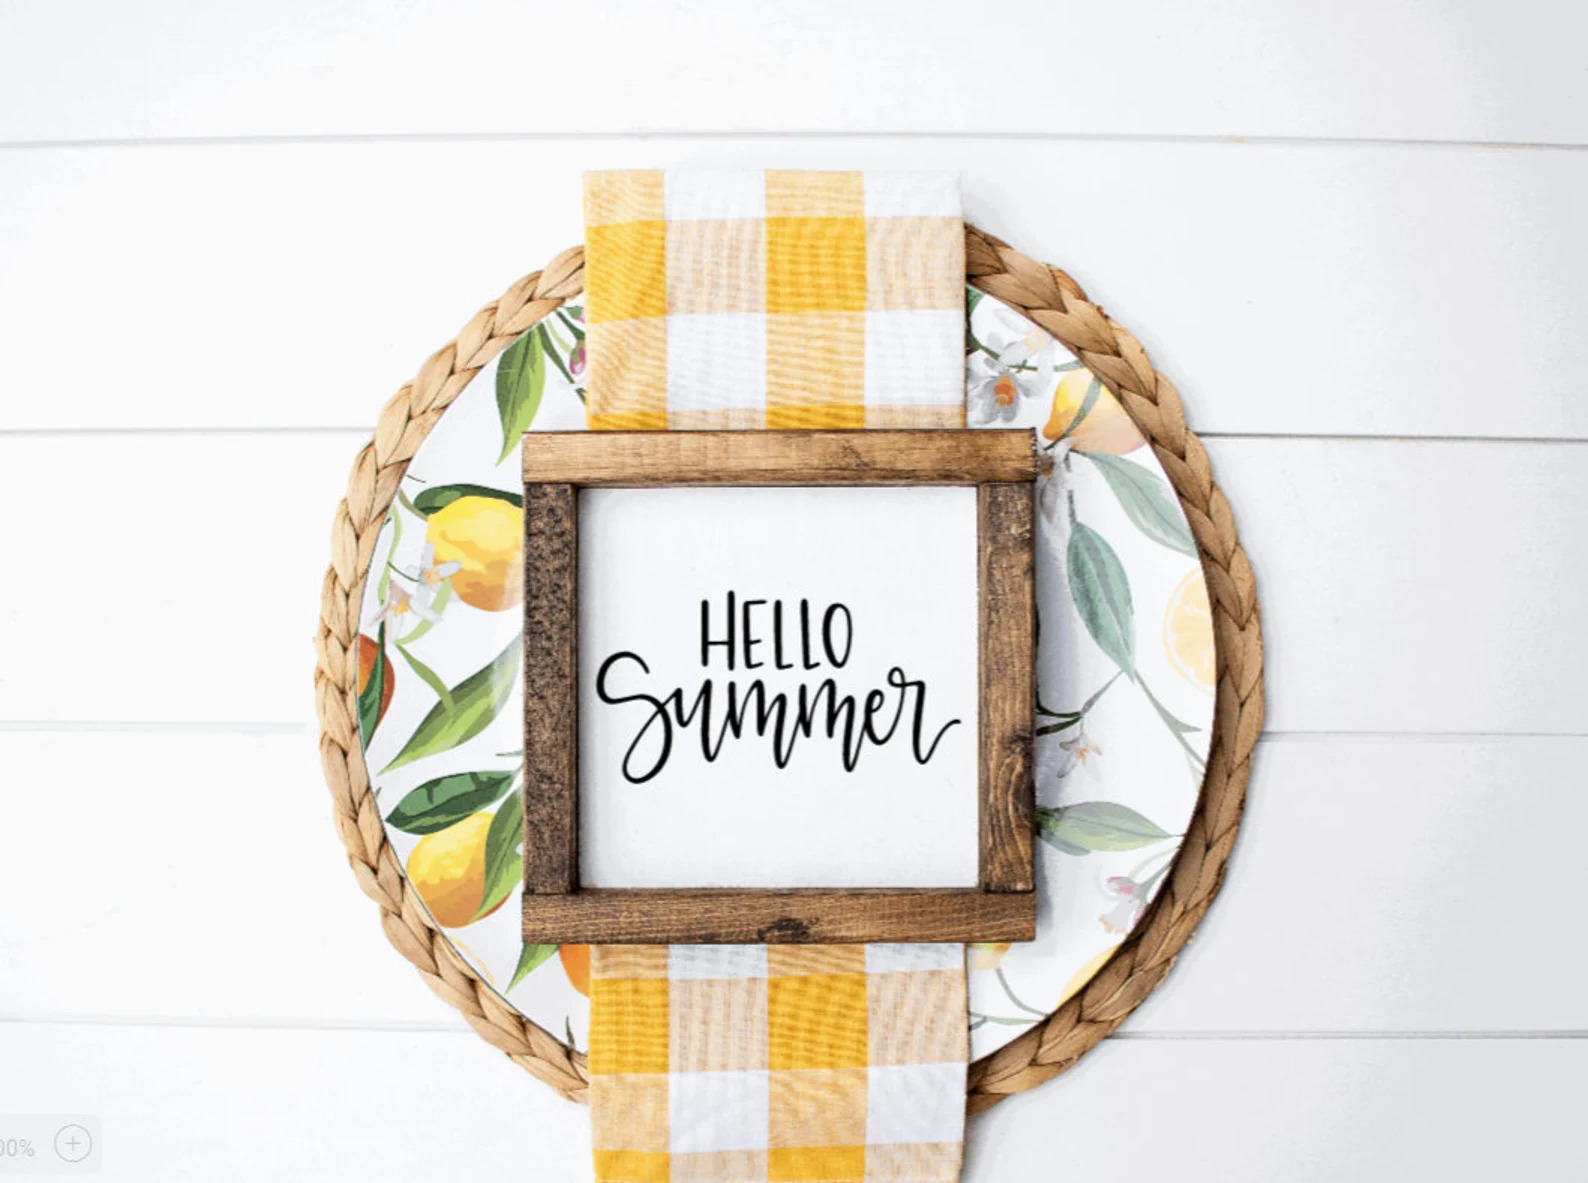 17 Sweet Summertime Sign Designs To Greet The Season In Style